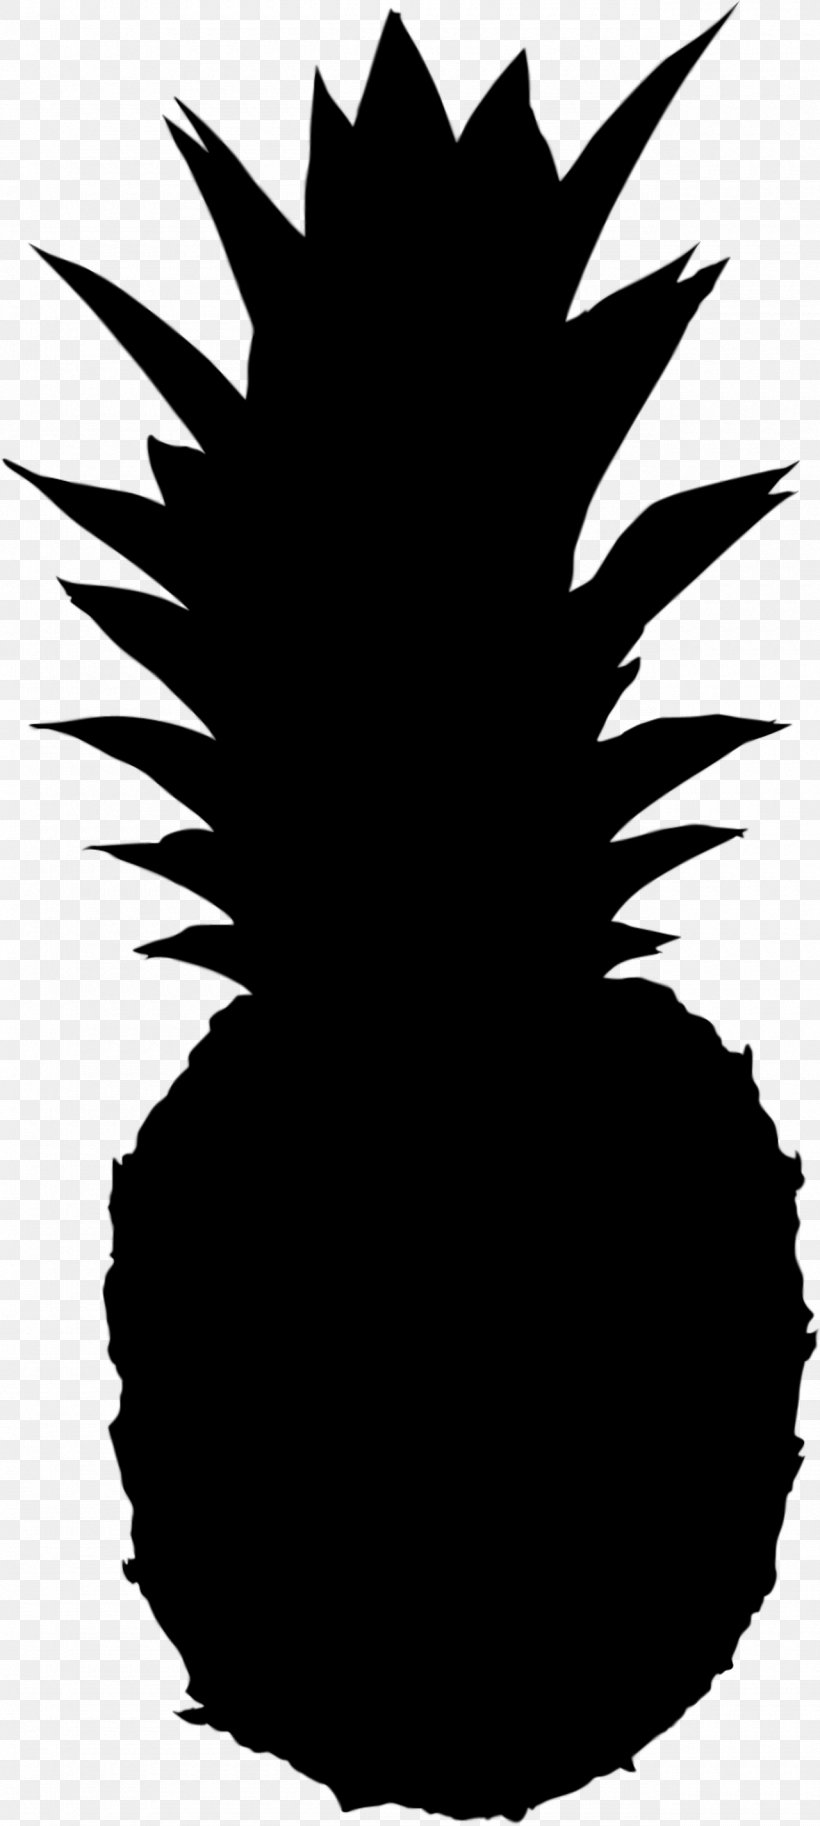 Leaf Clip Art Flower Silhouette Tree, PNG, 1280x2851px, Leaf, Ananas, Arecales, Black, Blackandwhite Download Free